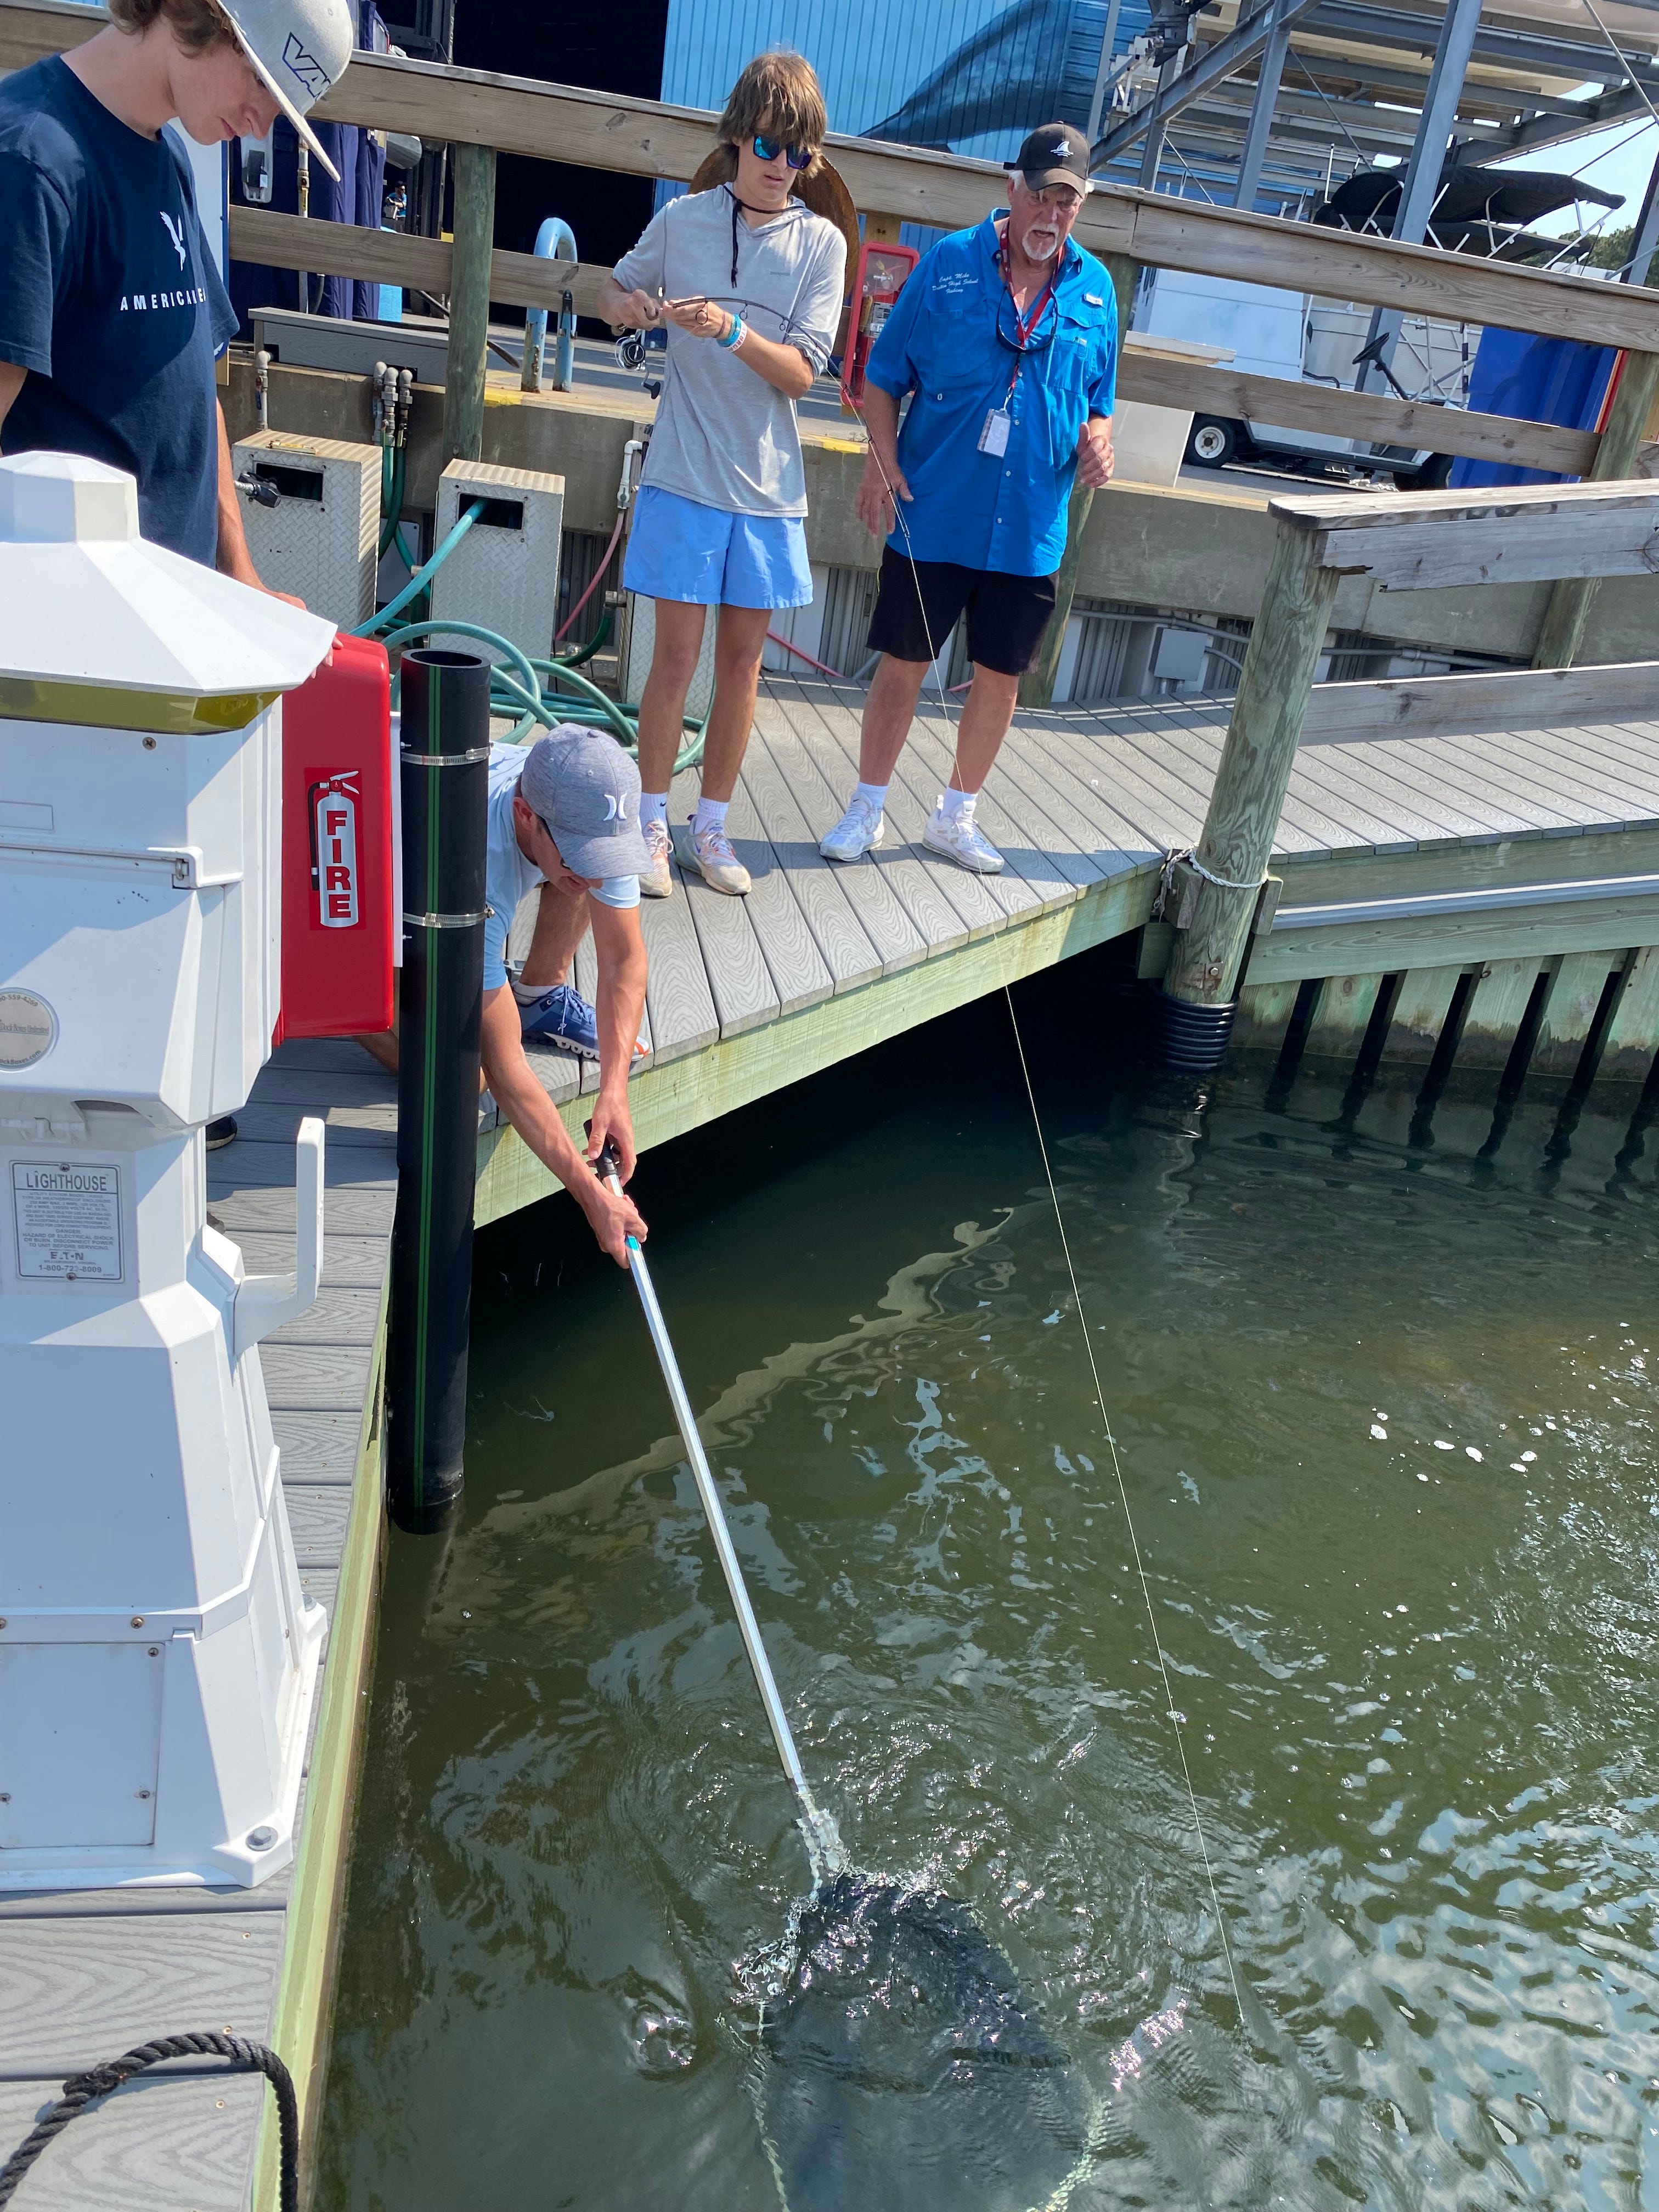 Here's a look at some of the action at the Legendary Marine Destin Fishing Class Bay Tournament on Wednesday afternoon.